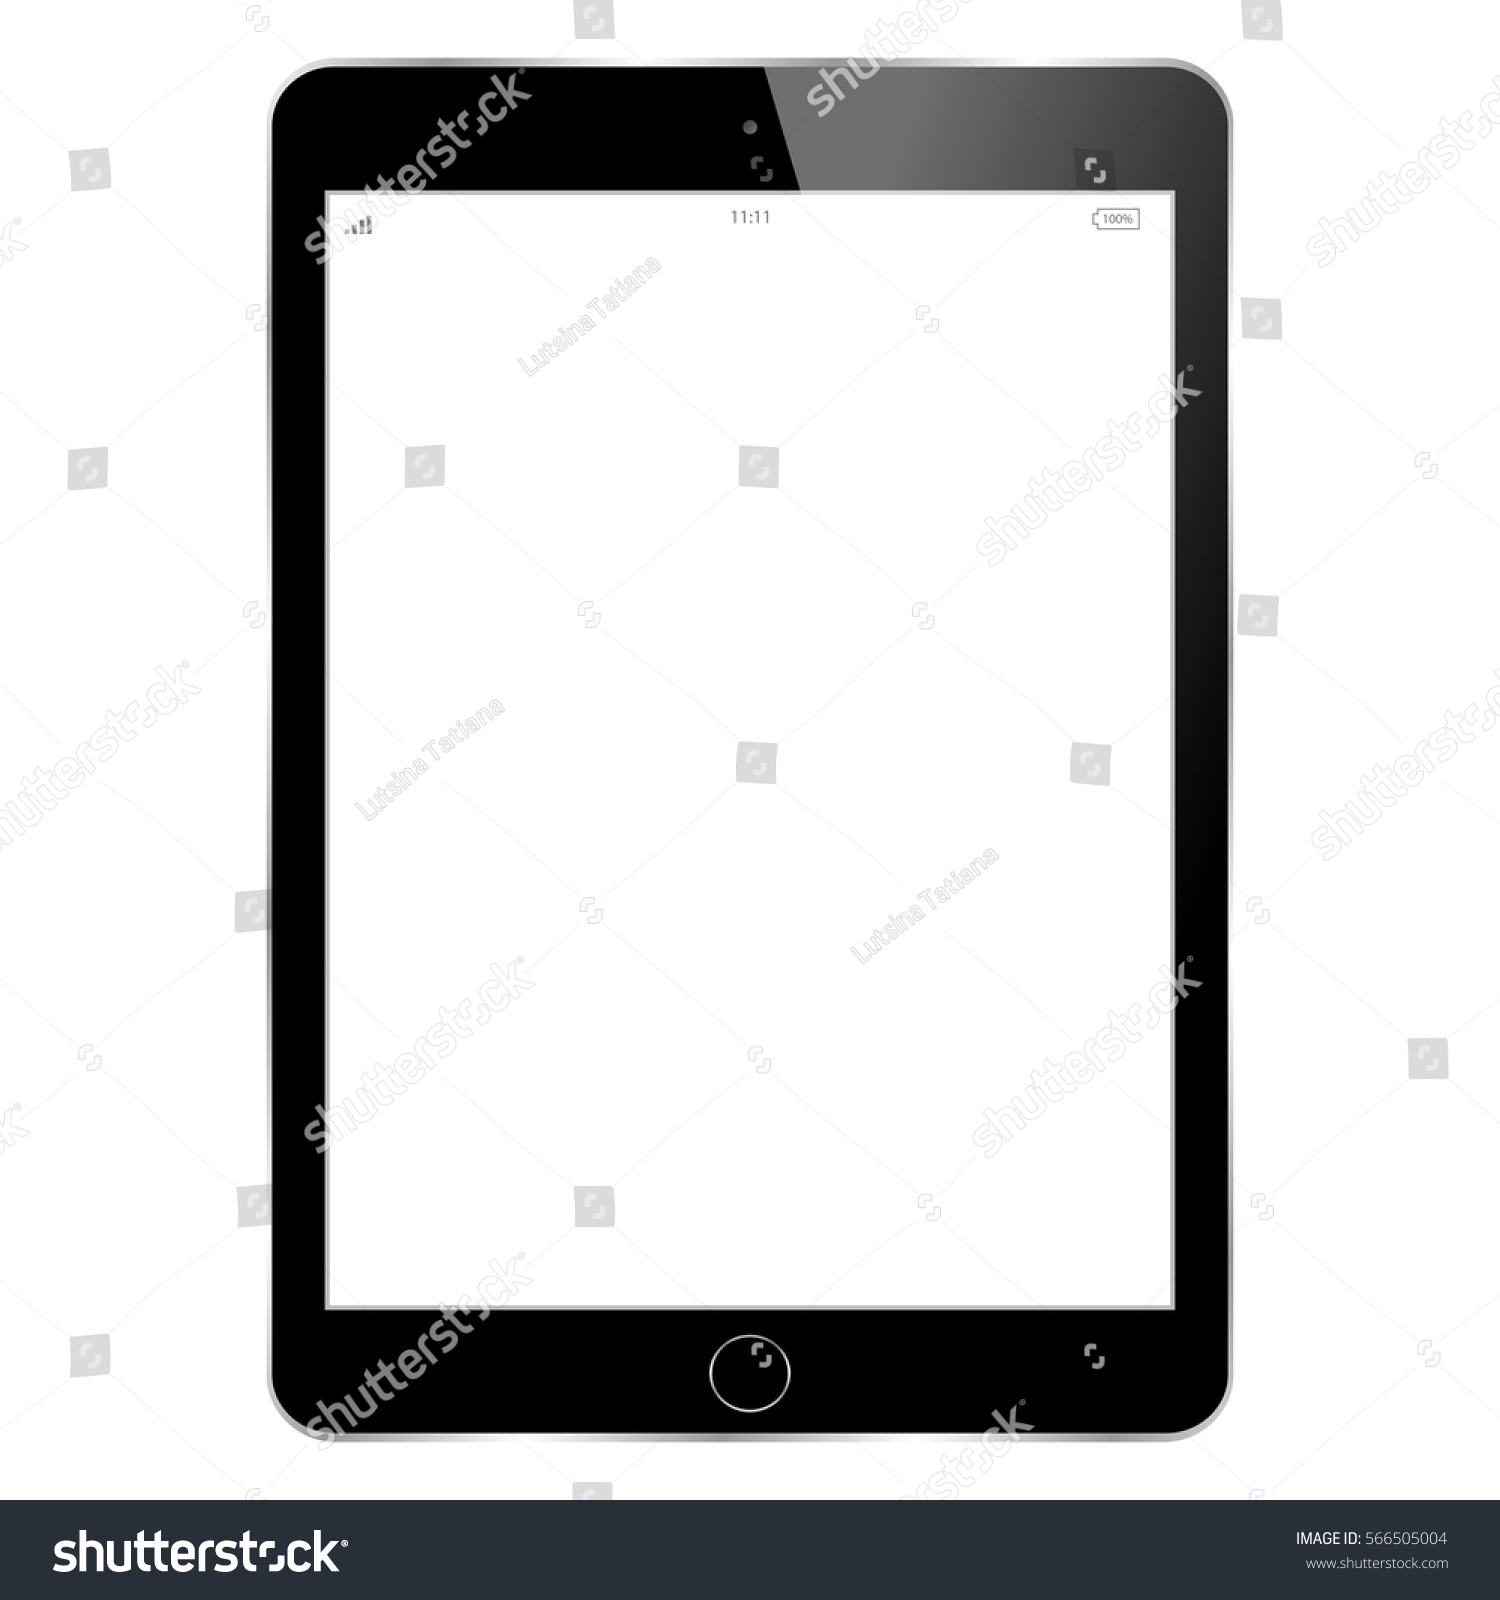 Realistic tablet pc computer with blank screen isolated on white background. Tablet in modern style black color with blank touch screen isolated on white background.  #566505004